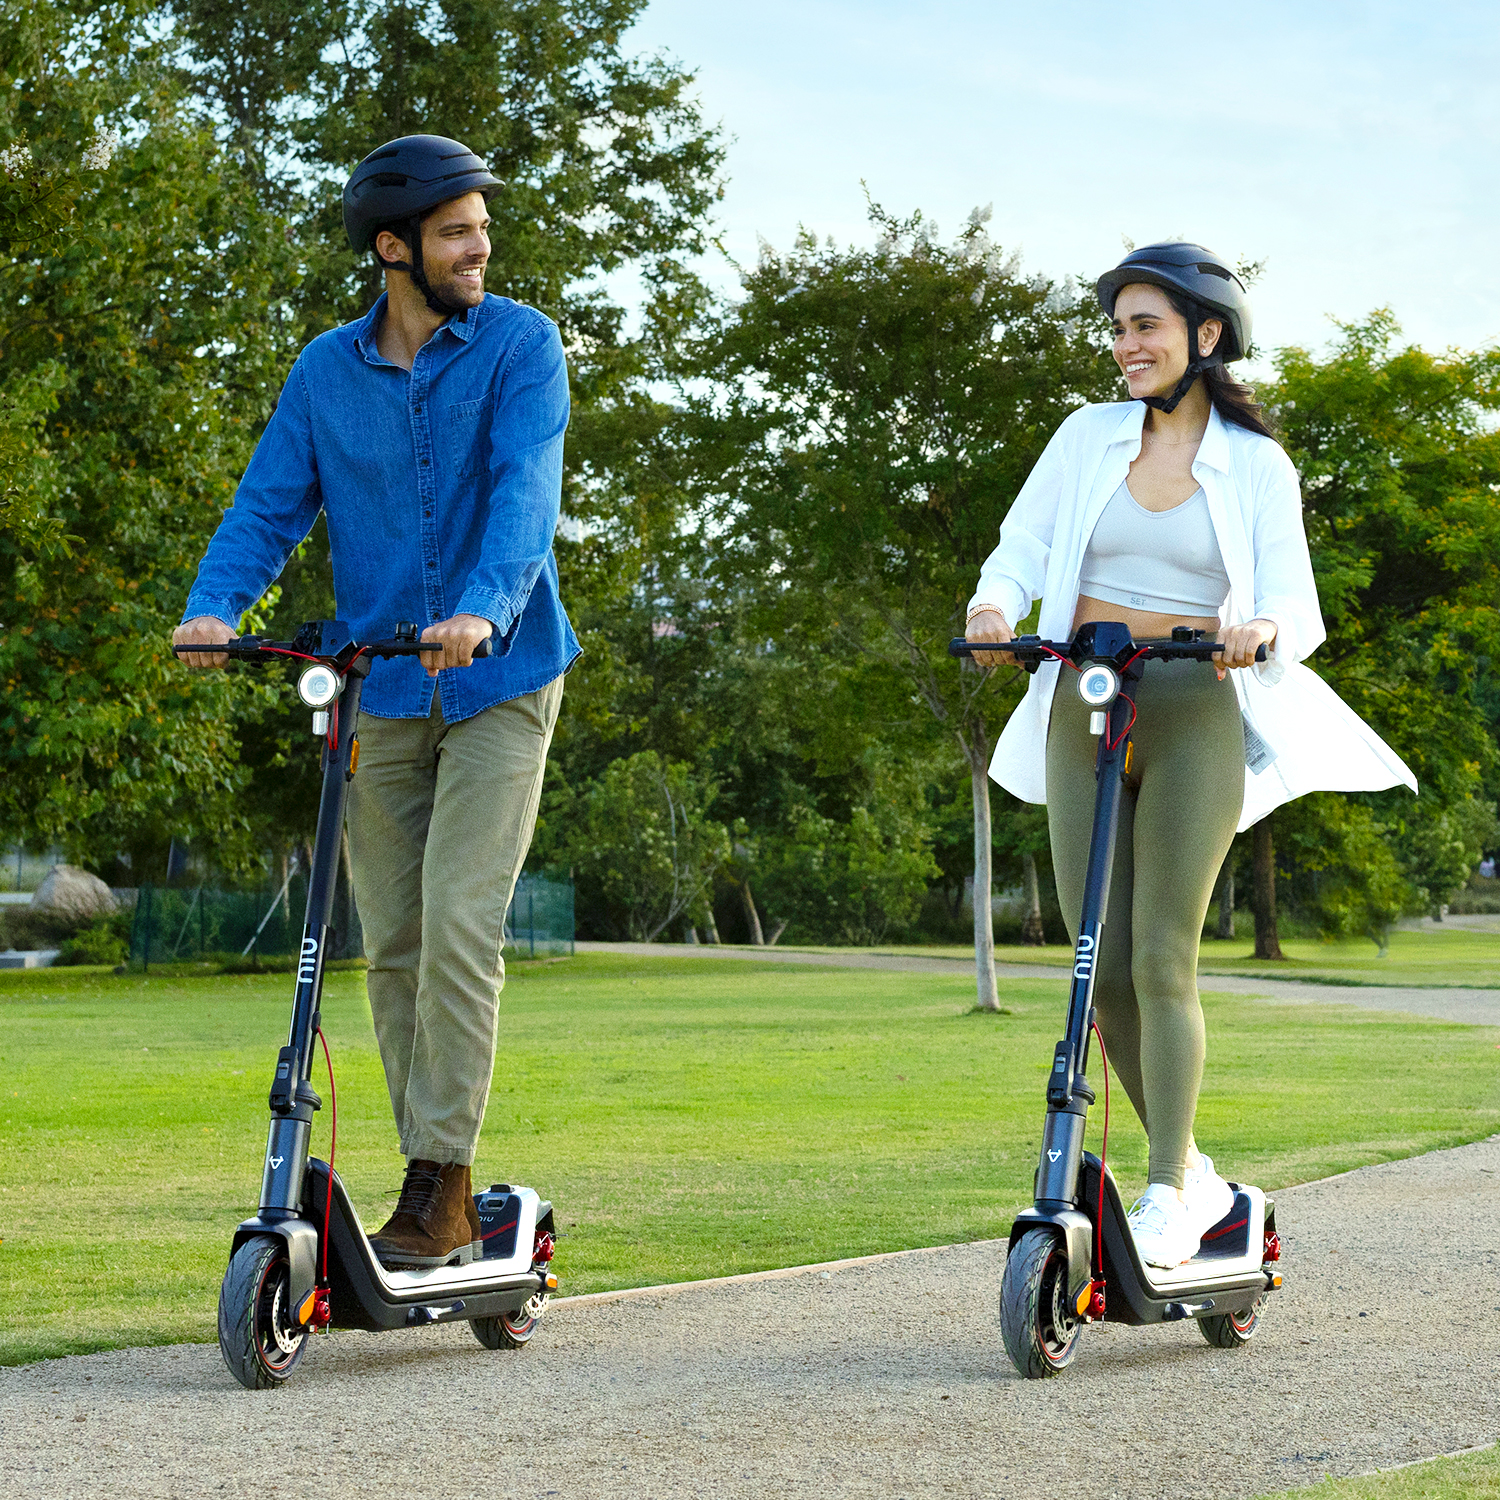 NIU KQi3 Max Electric Scooter 40.4 Miles Long Range Upgraded Motor Power Max Speed 20 mph Portable Foldable Commuting - image 5 of 18